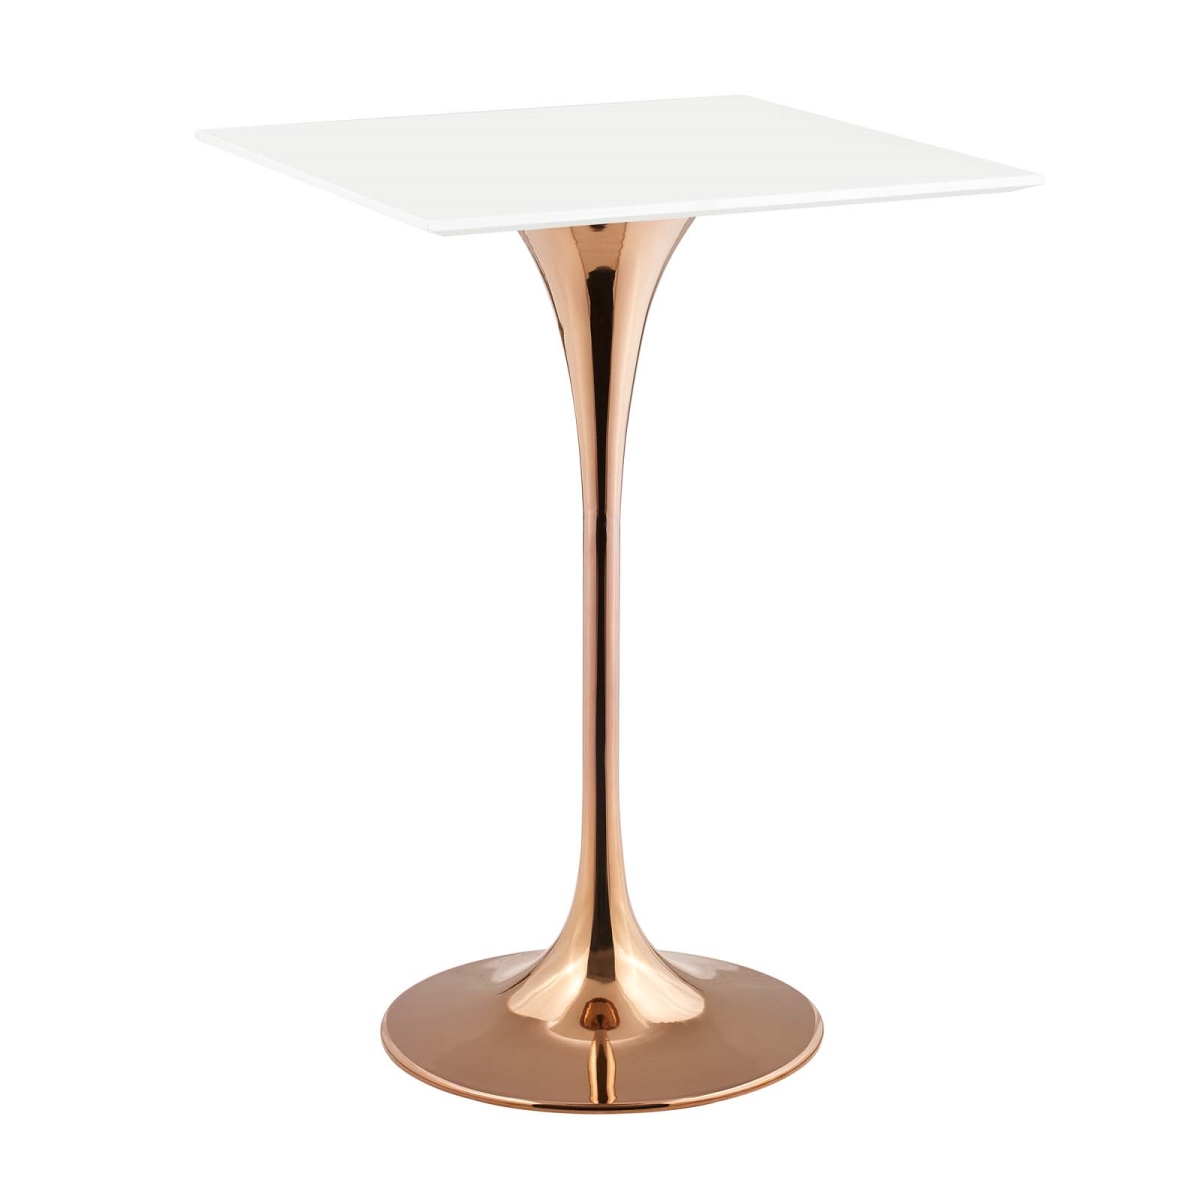 Eei-3266-ros-whi Lippa 28 In. Square Bar Table - Rose White, 40.5 X 27.5 X 27.5 In.